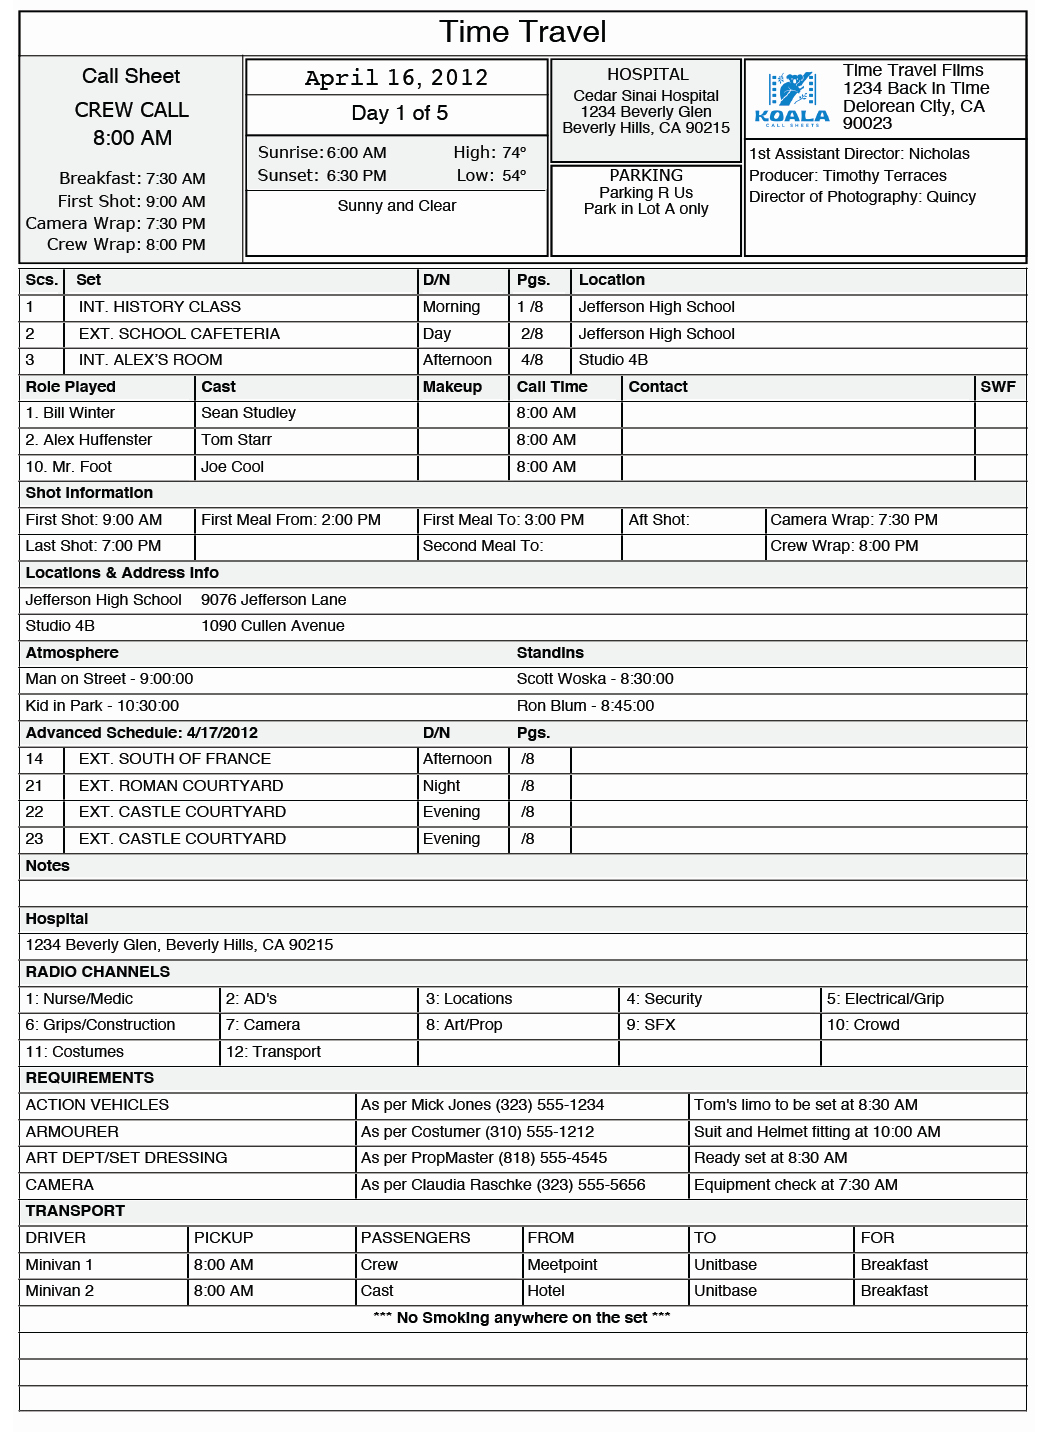 Call Sheet Template Excel Unique Free Call Sheet Template In Excel